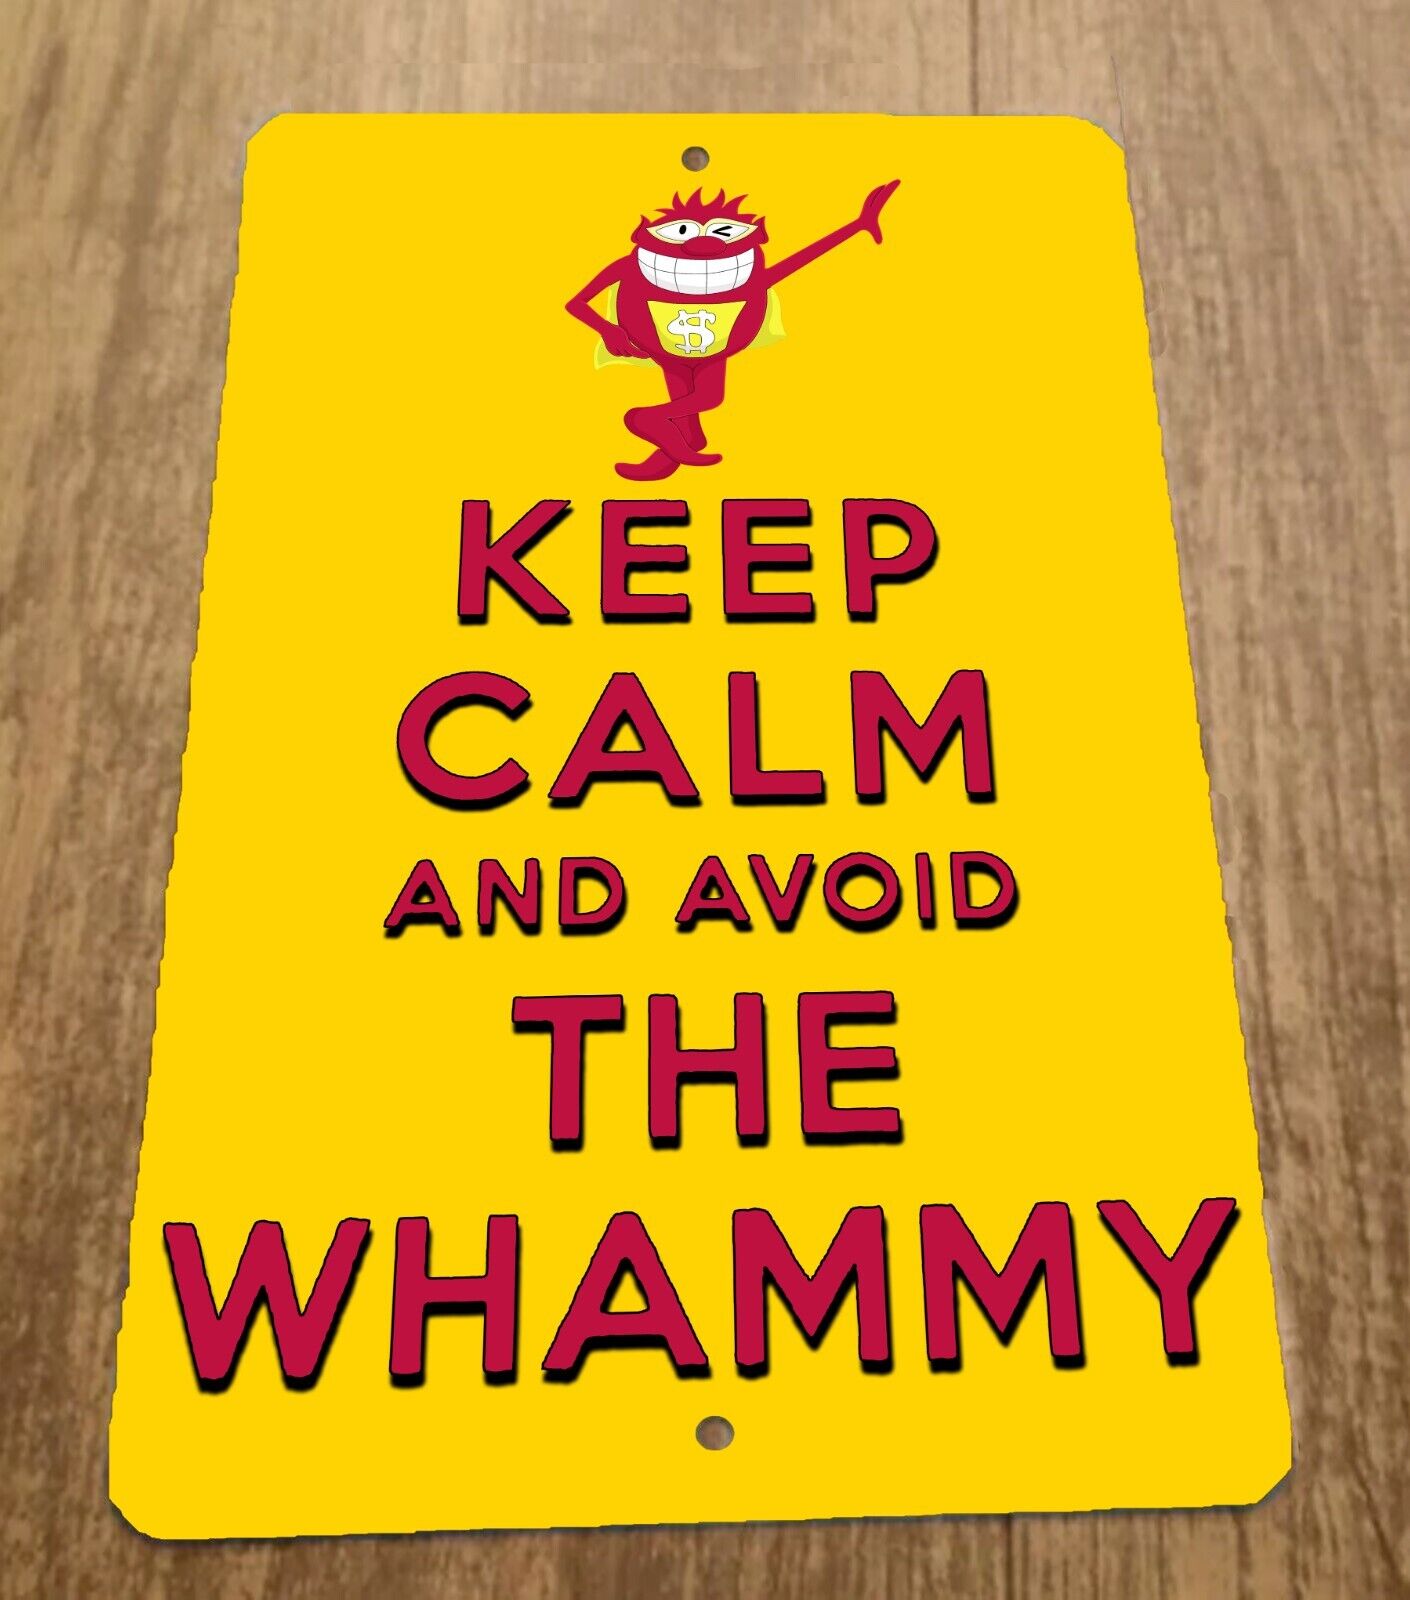 Keep Calm and Avoid the Whammy Press Your Luck 8x12 Metal Wall Sign